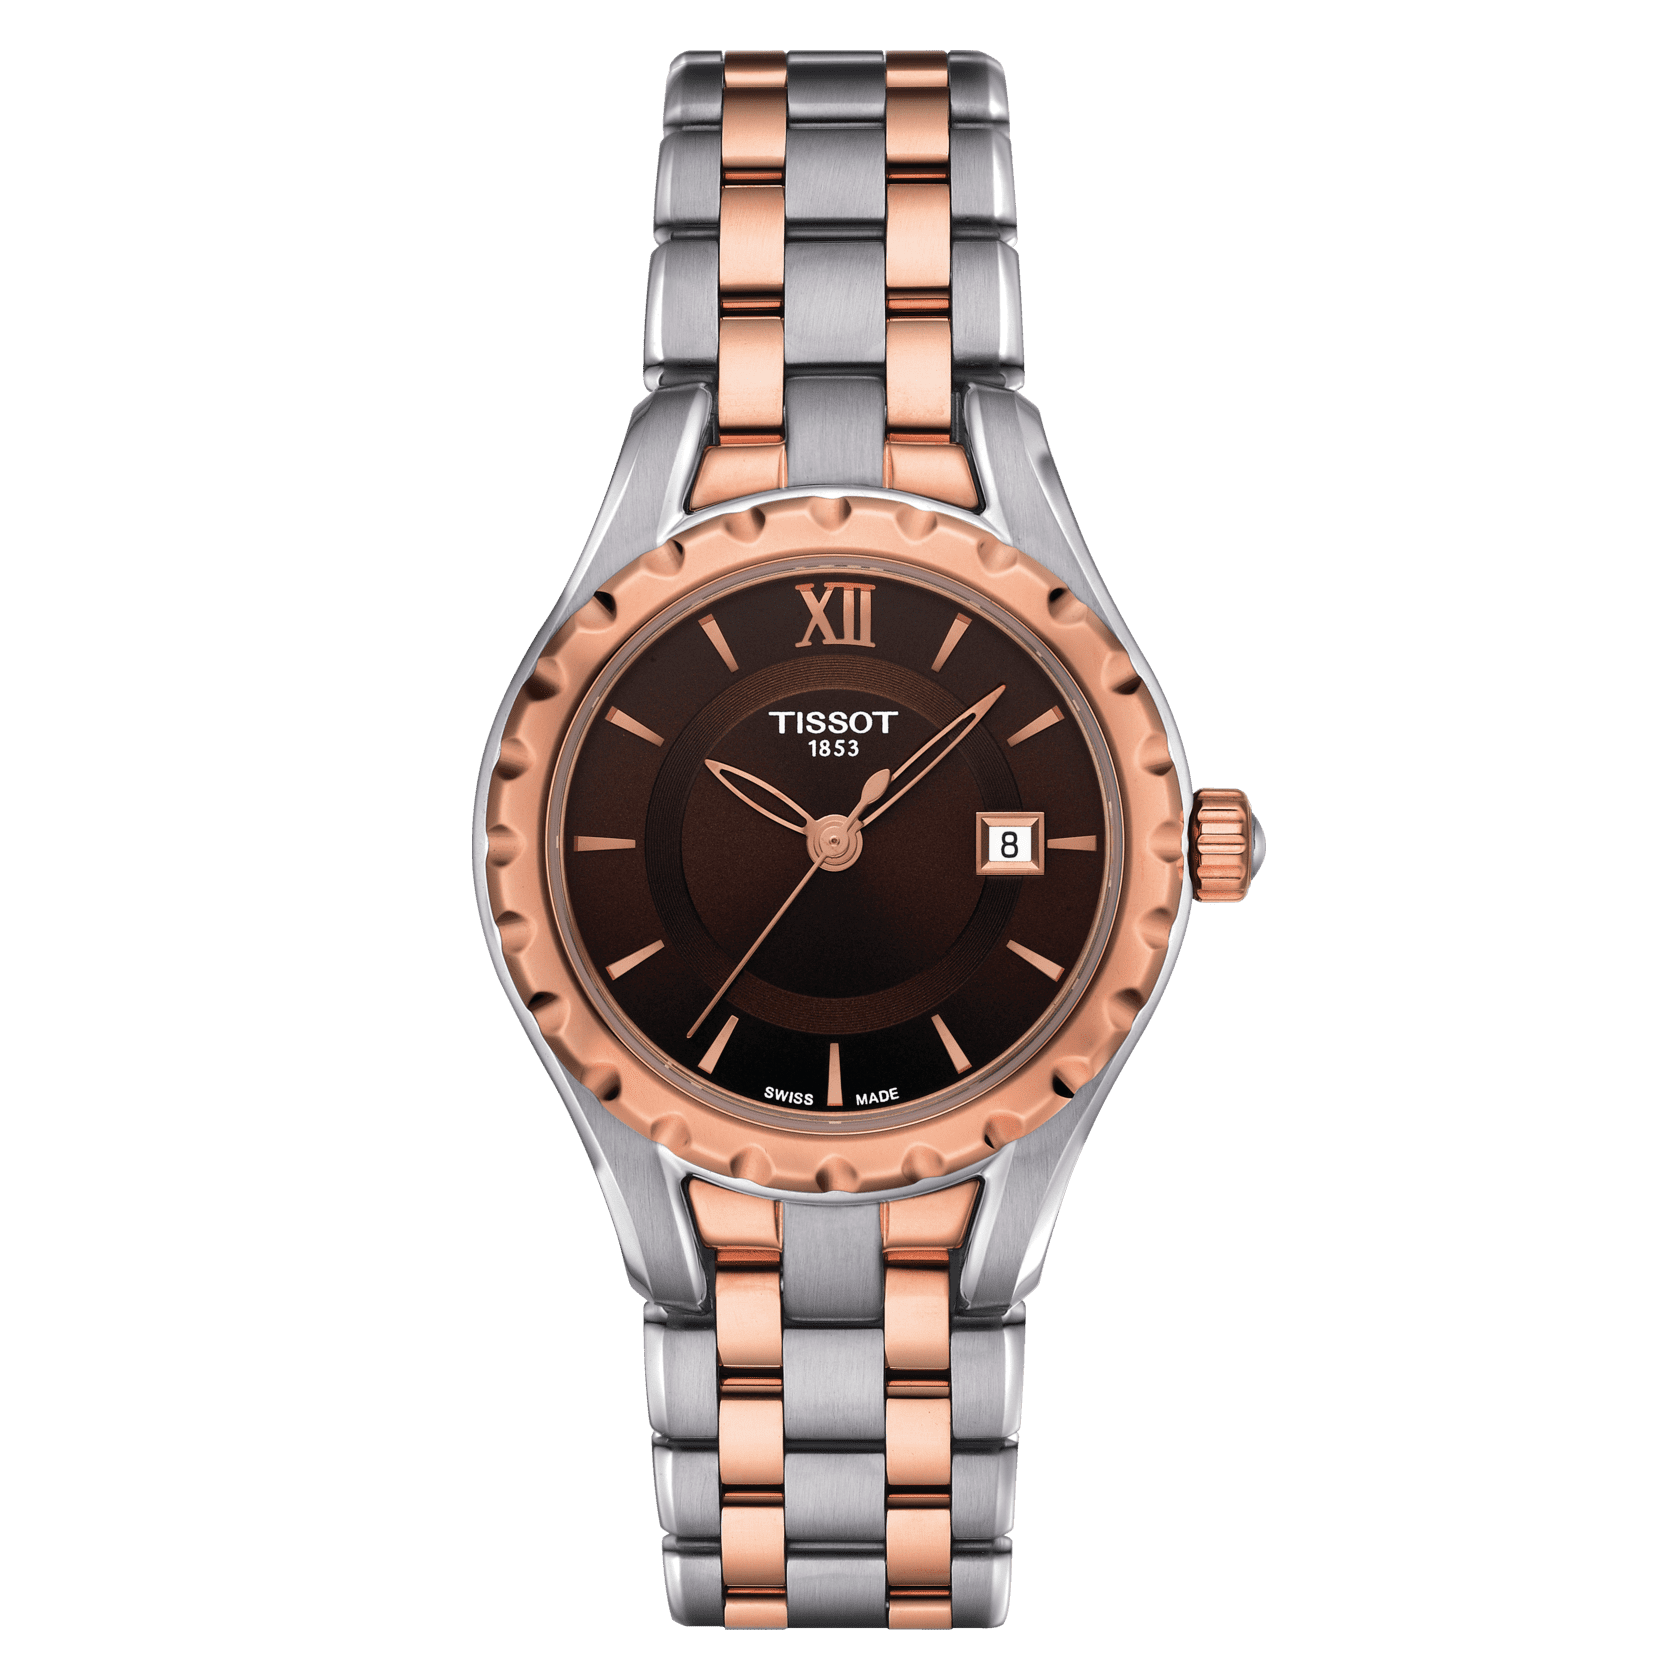 Best Replica Watches Reviews